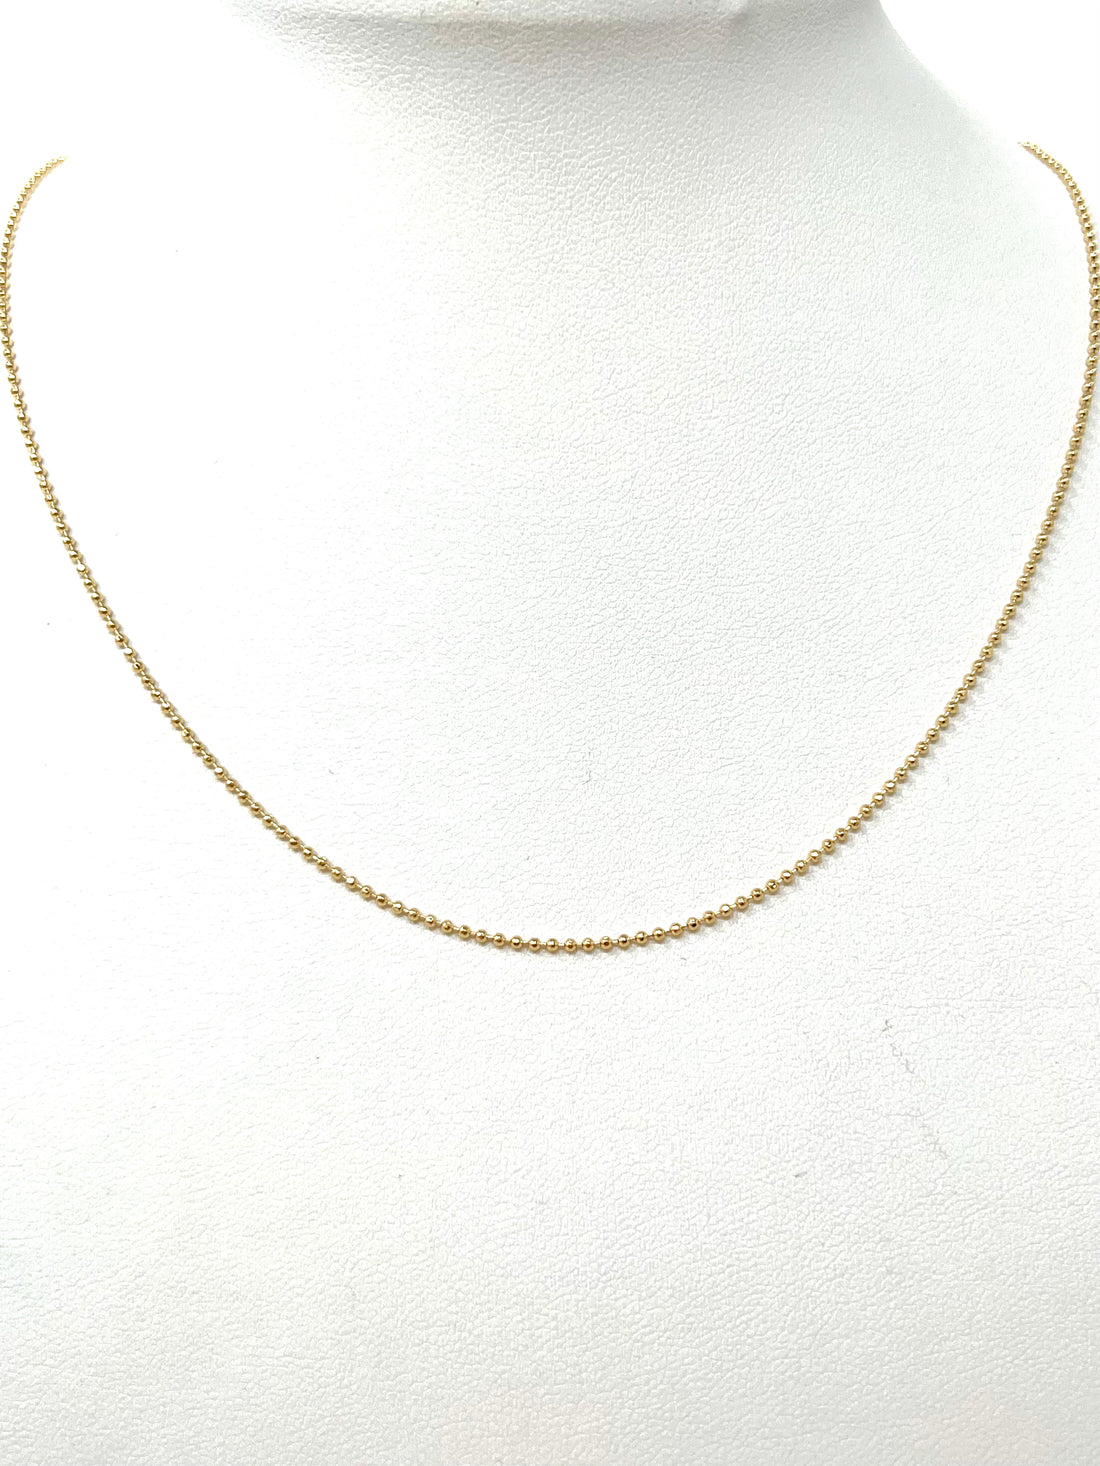 Charming Delicate Ball and Chain Gold 16” Necklace